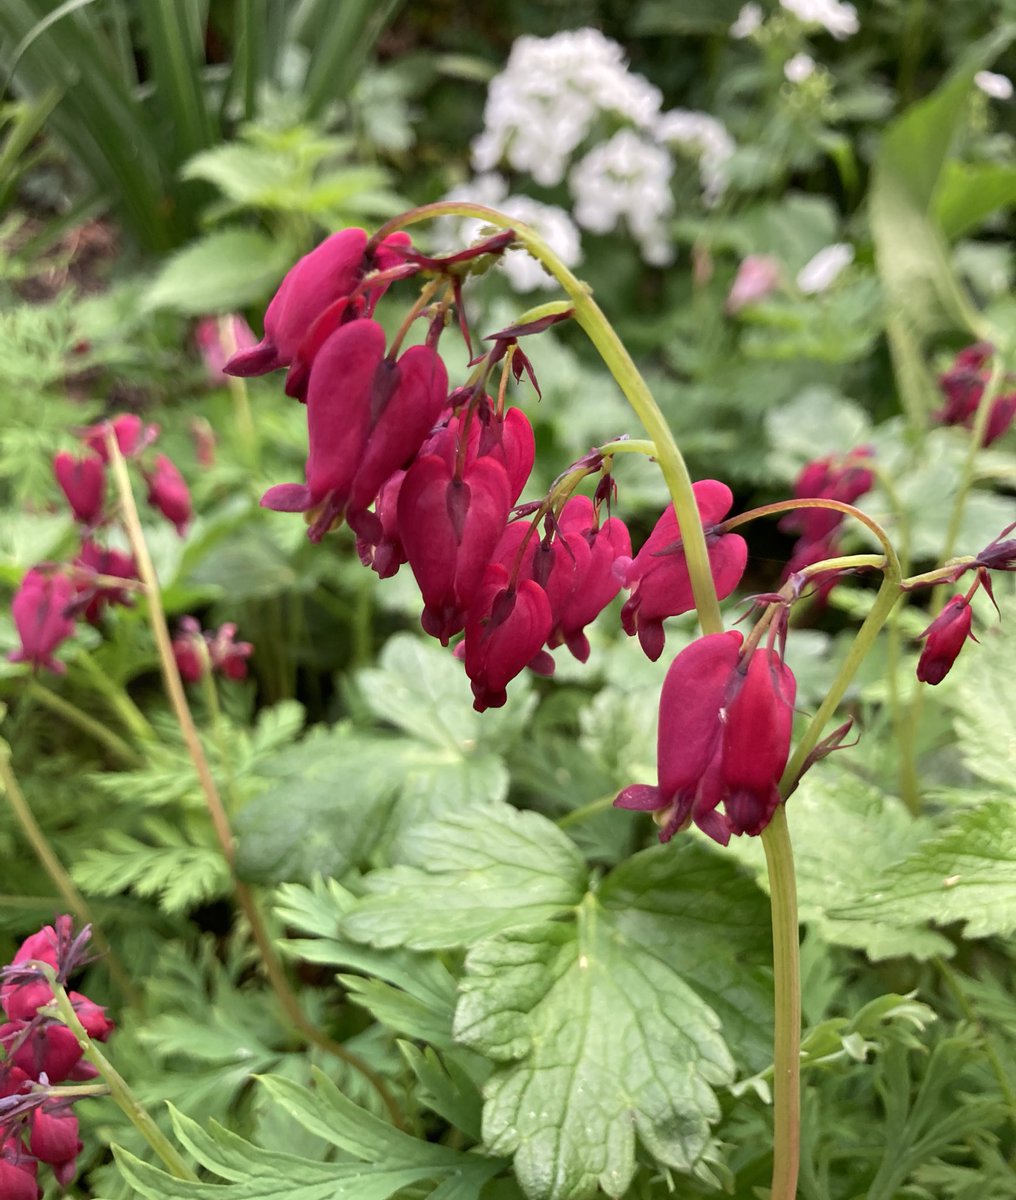 Bleeding hearts of Dicentra Formosa ‘Bacchanal’ for #FlowersOnFriday …